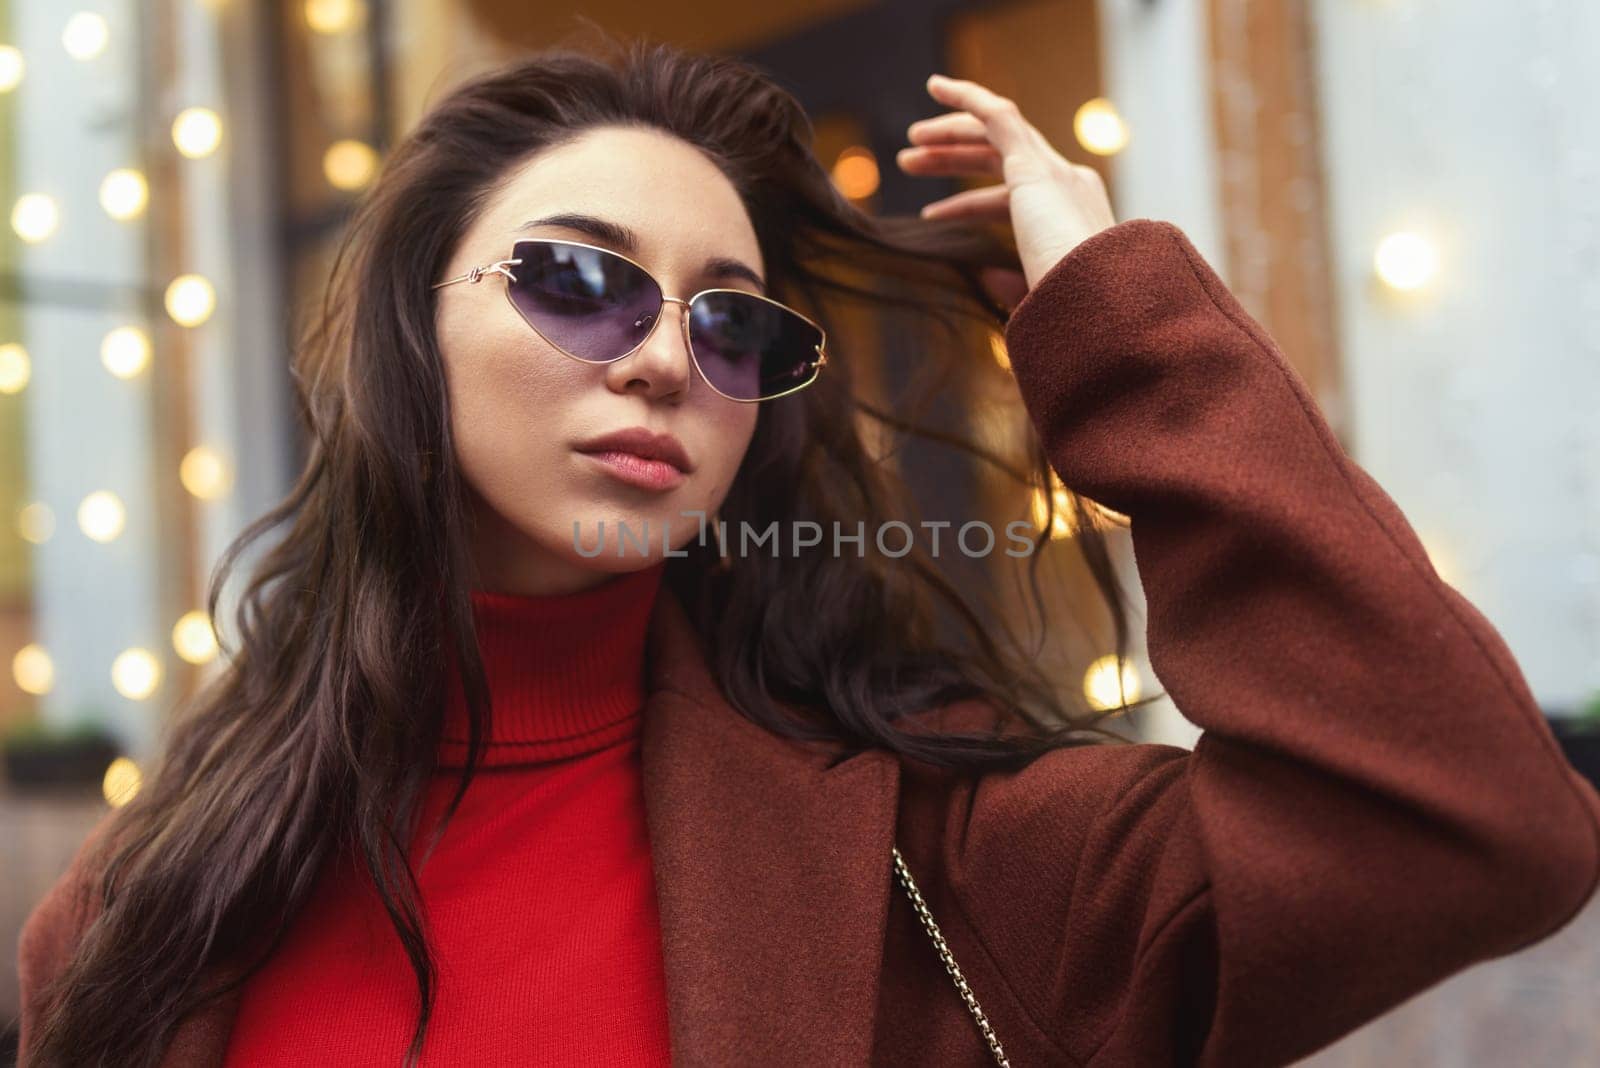 Portrait of a fashionable woman in sunglasses on the street.